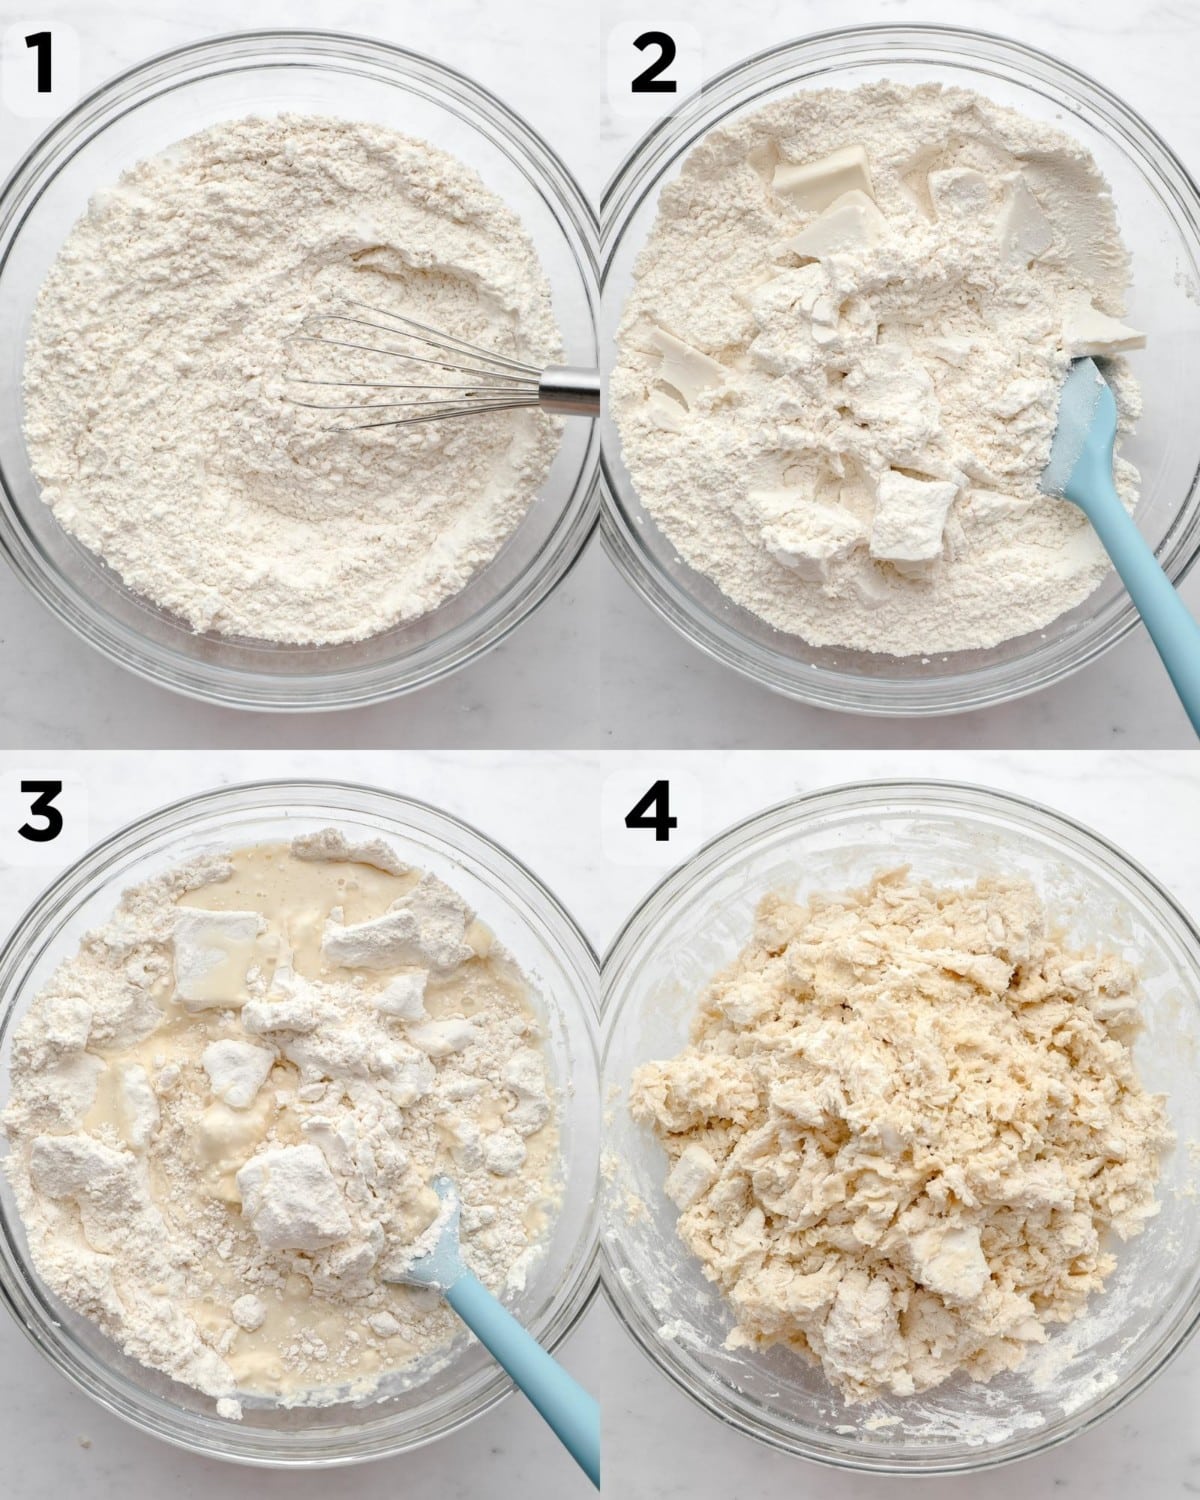 4 images showing how to make vegan croissant dough.